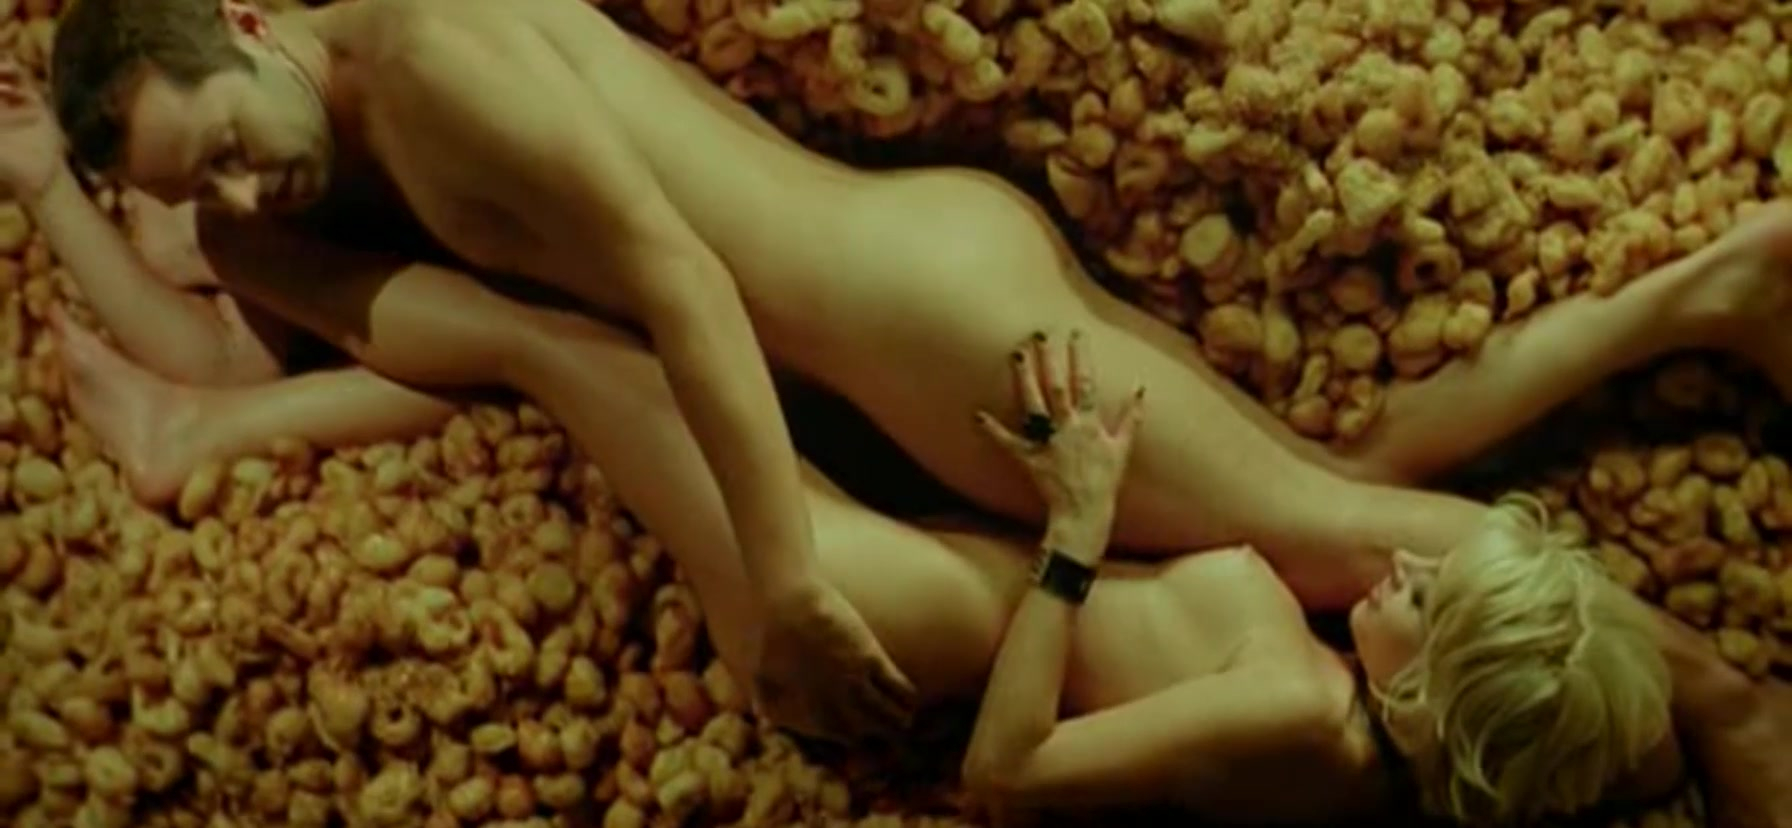 Fay Xyla nude - Honey and the pig (2005)